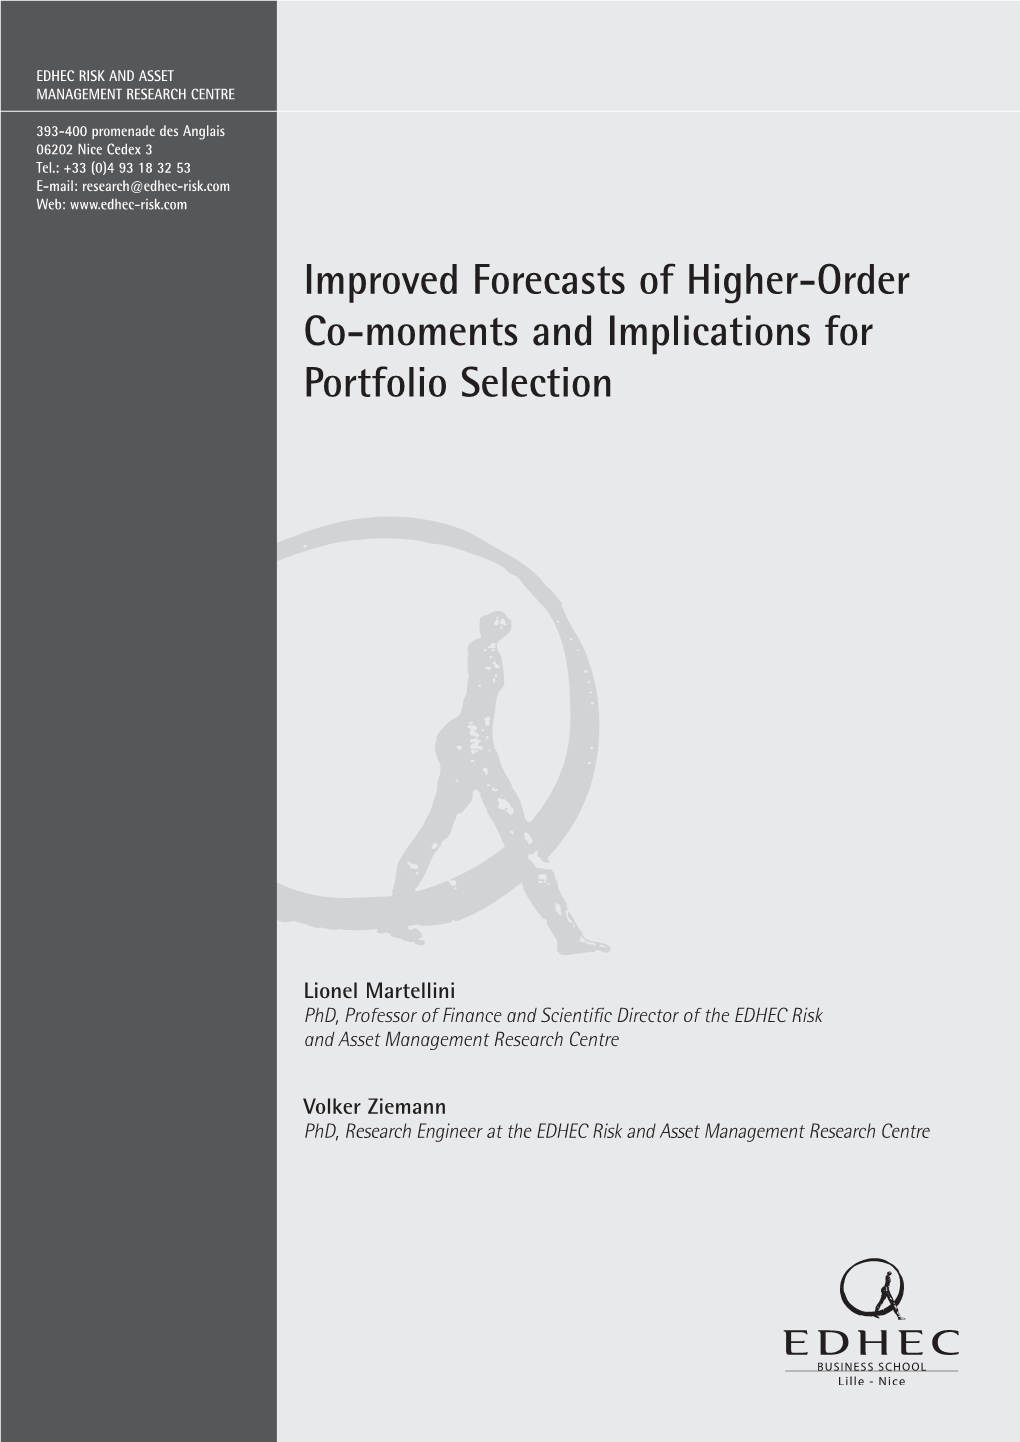 Improved Forecasts of Higher-Order Co-Moments and Implications for Portfolio Selection